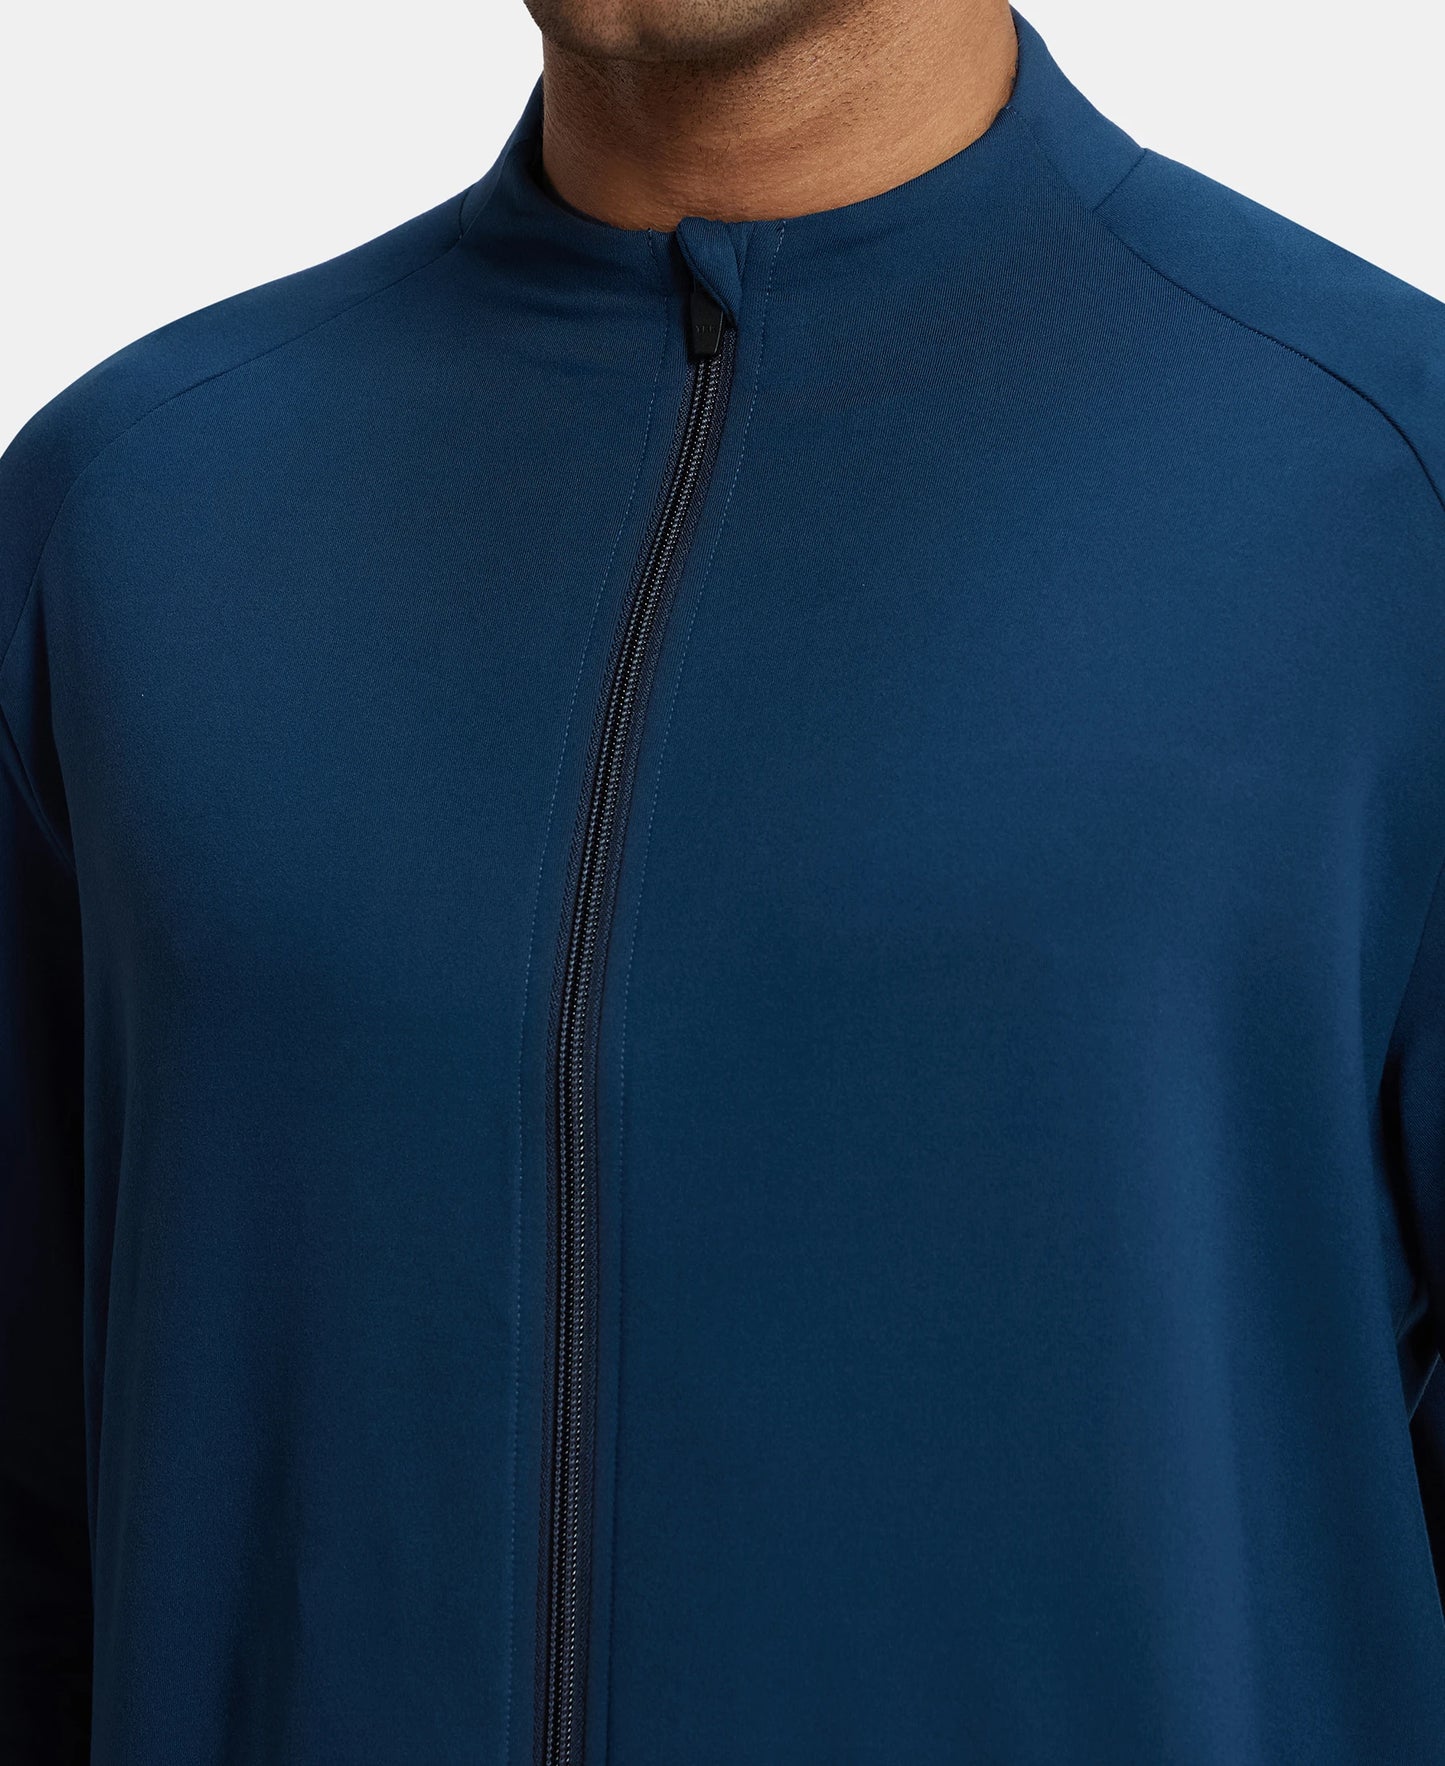 Soft Touch Microfiber Elastane Stretch Jacket with Thumbhole Styling - Moon Light Ocean-7